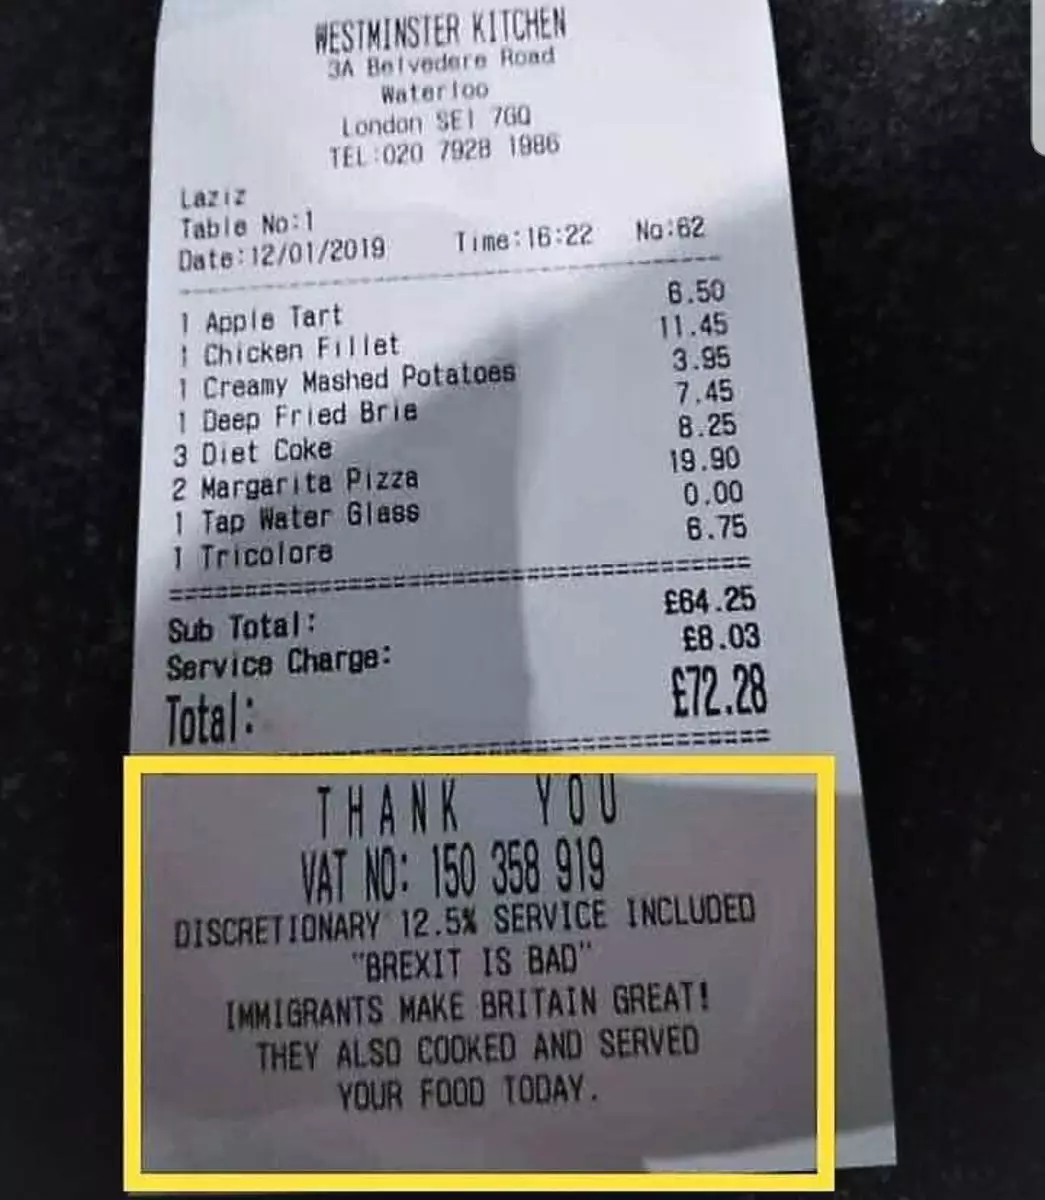 A photo of a receipt from Westminster Kitchen went viral receipt for its message.